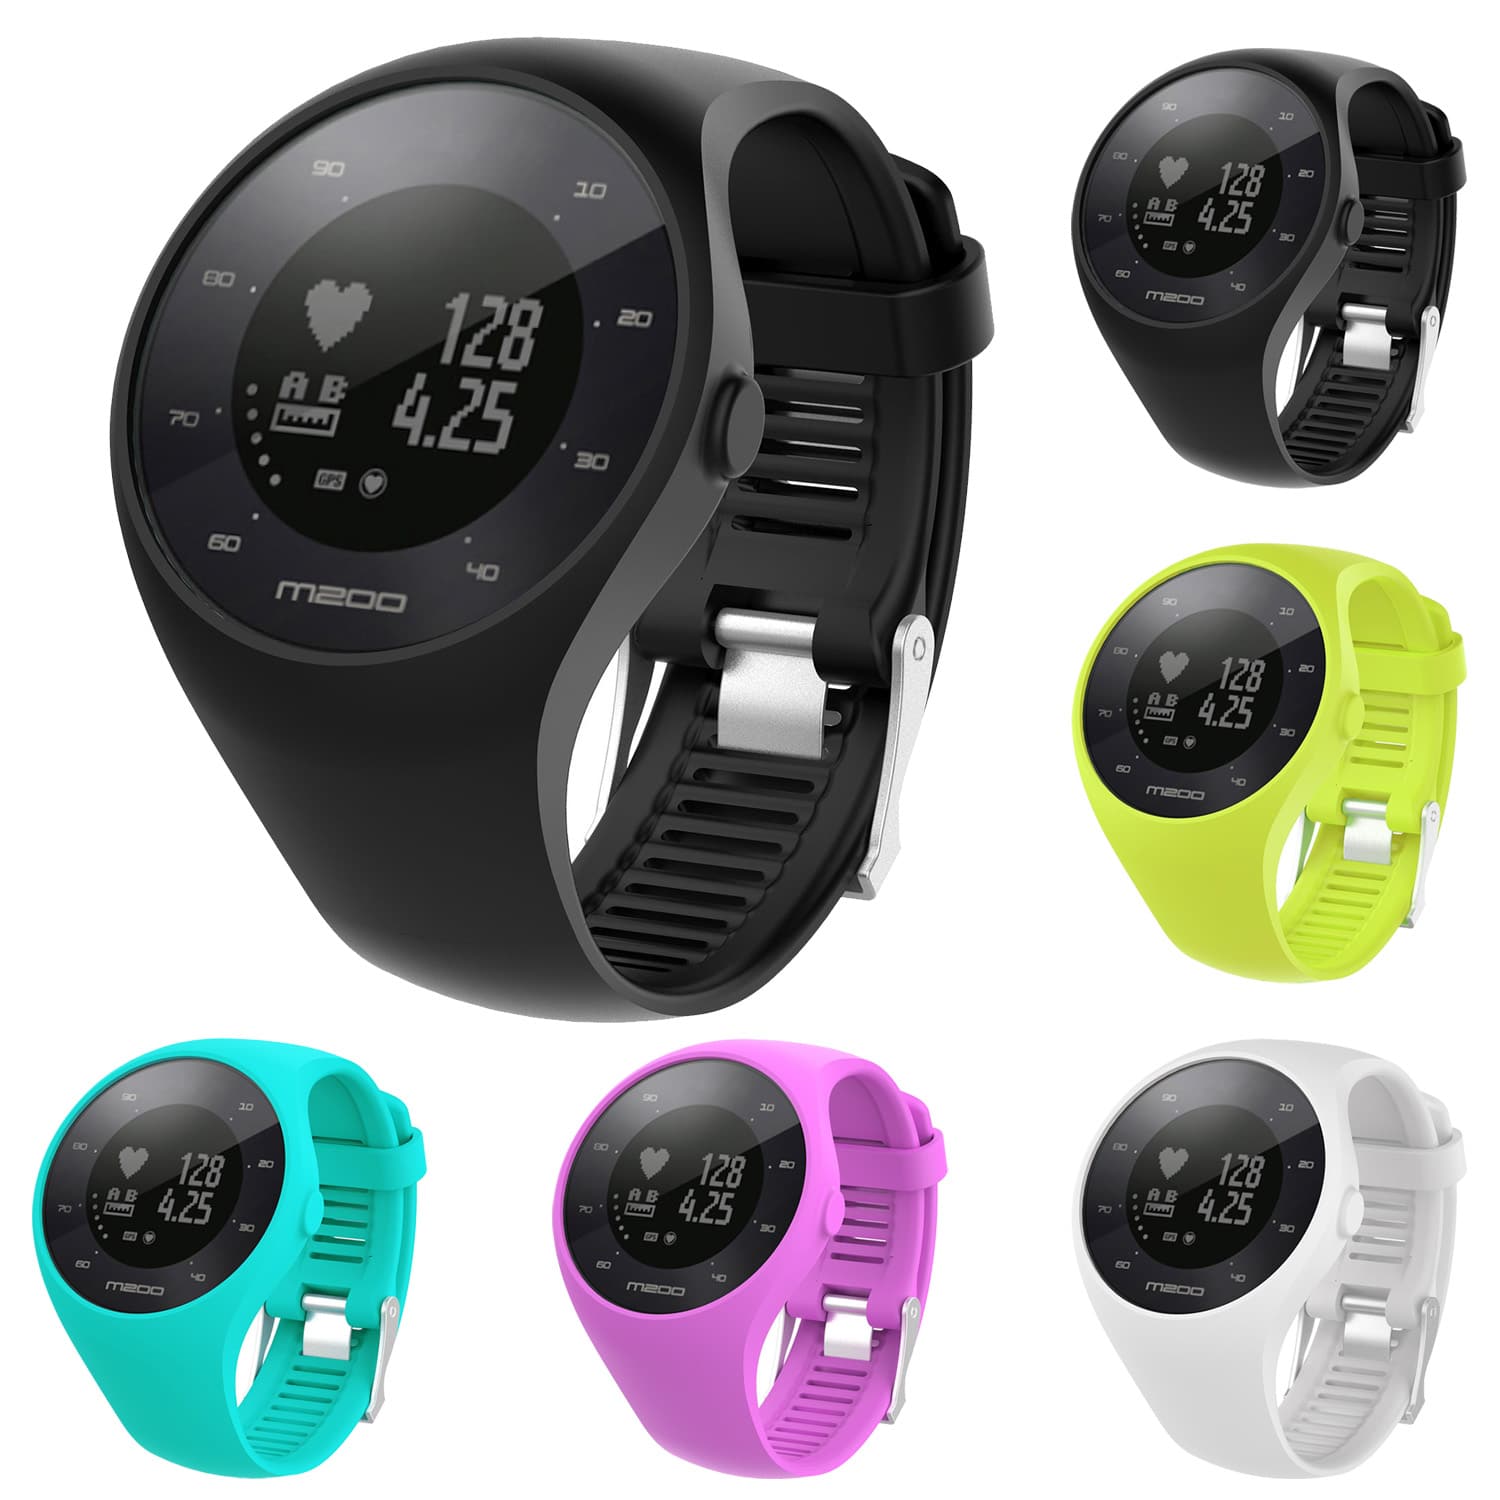 Replacement for M200 GPS Running Watch StrapsCo